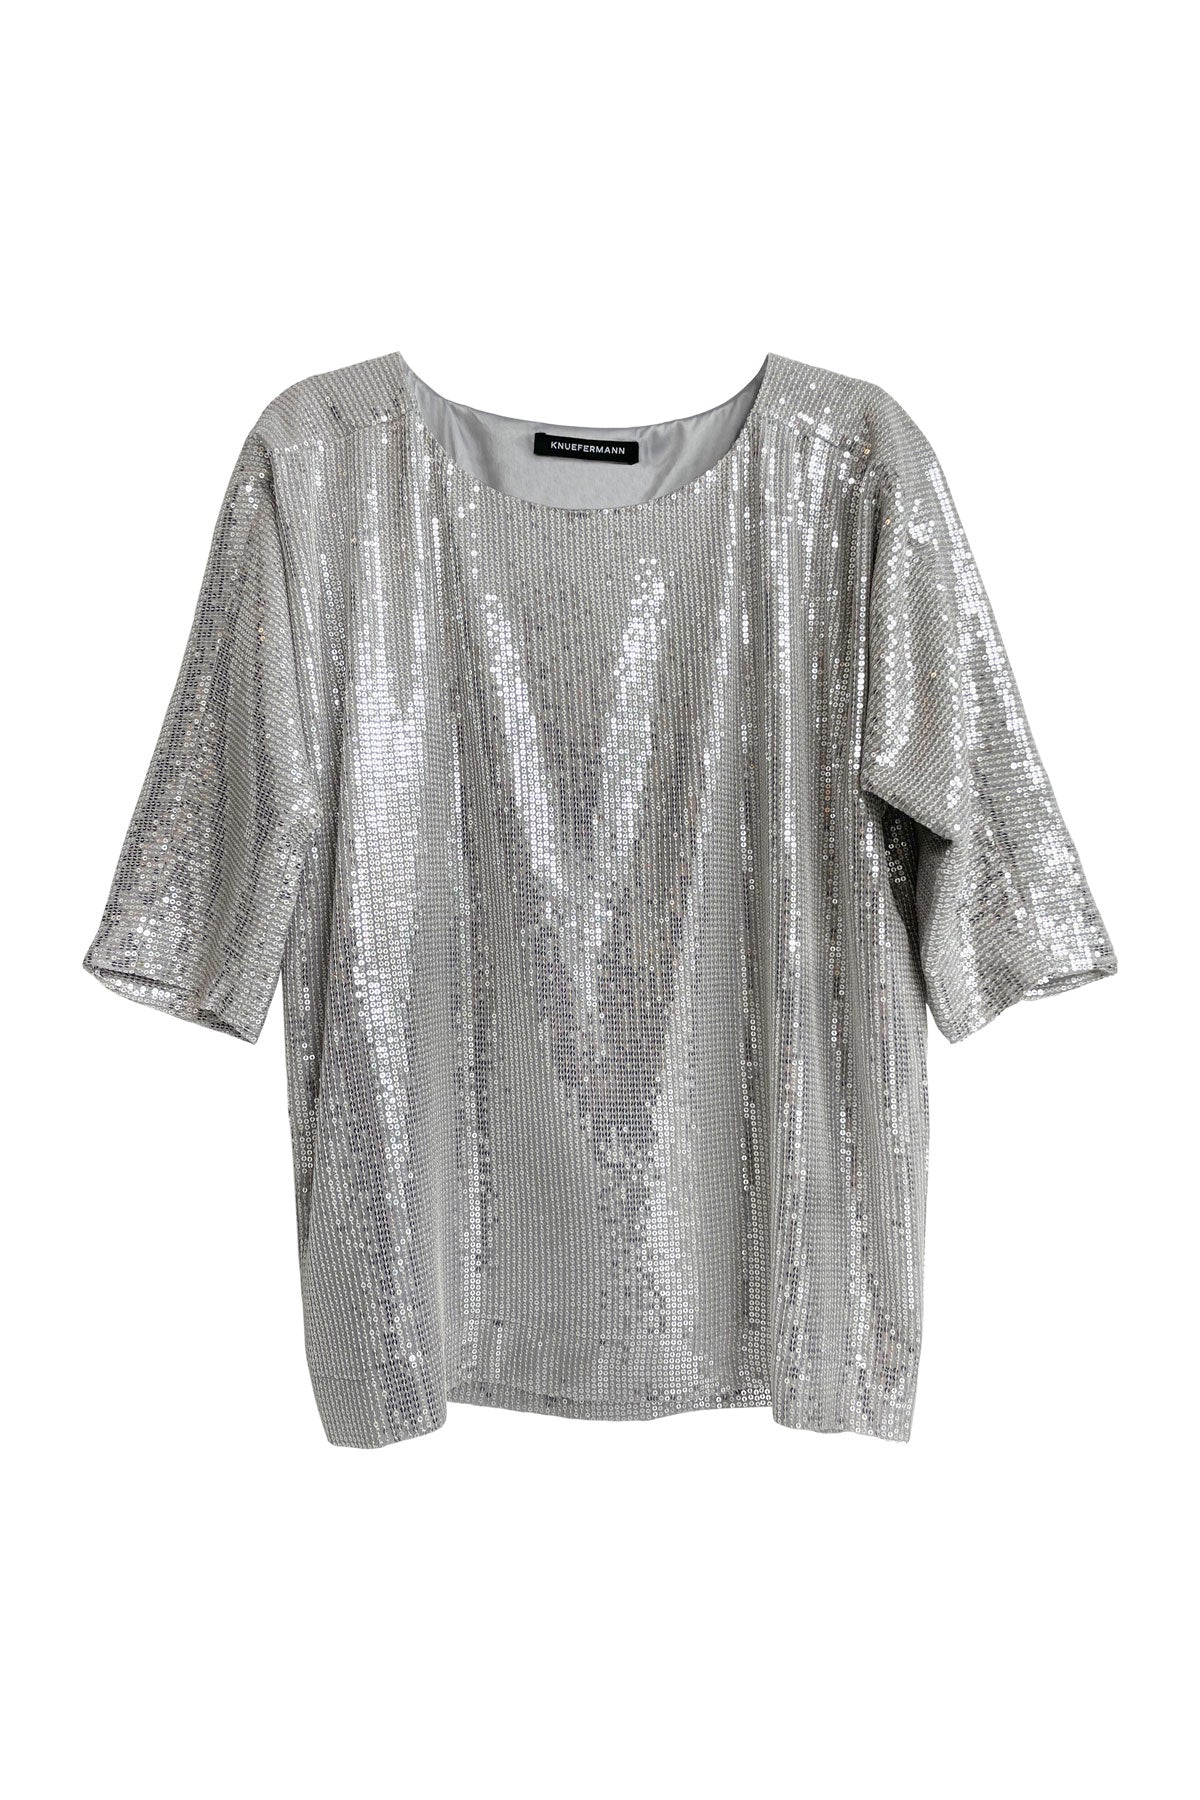 SEQUIN SHIFT TOP SILVER